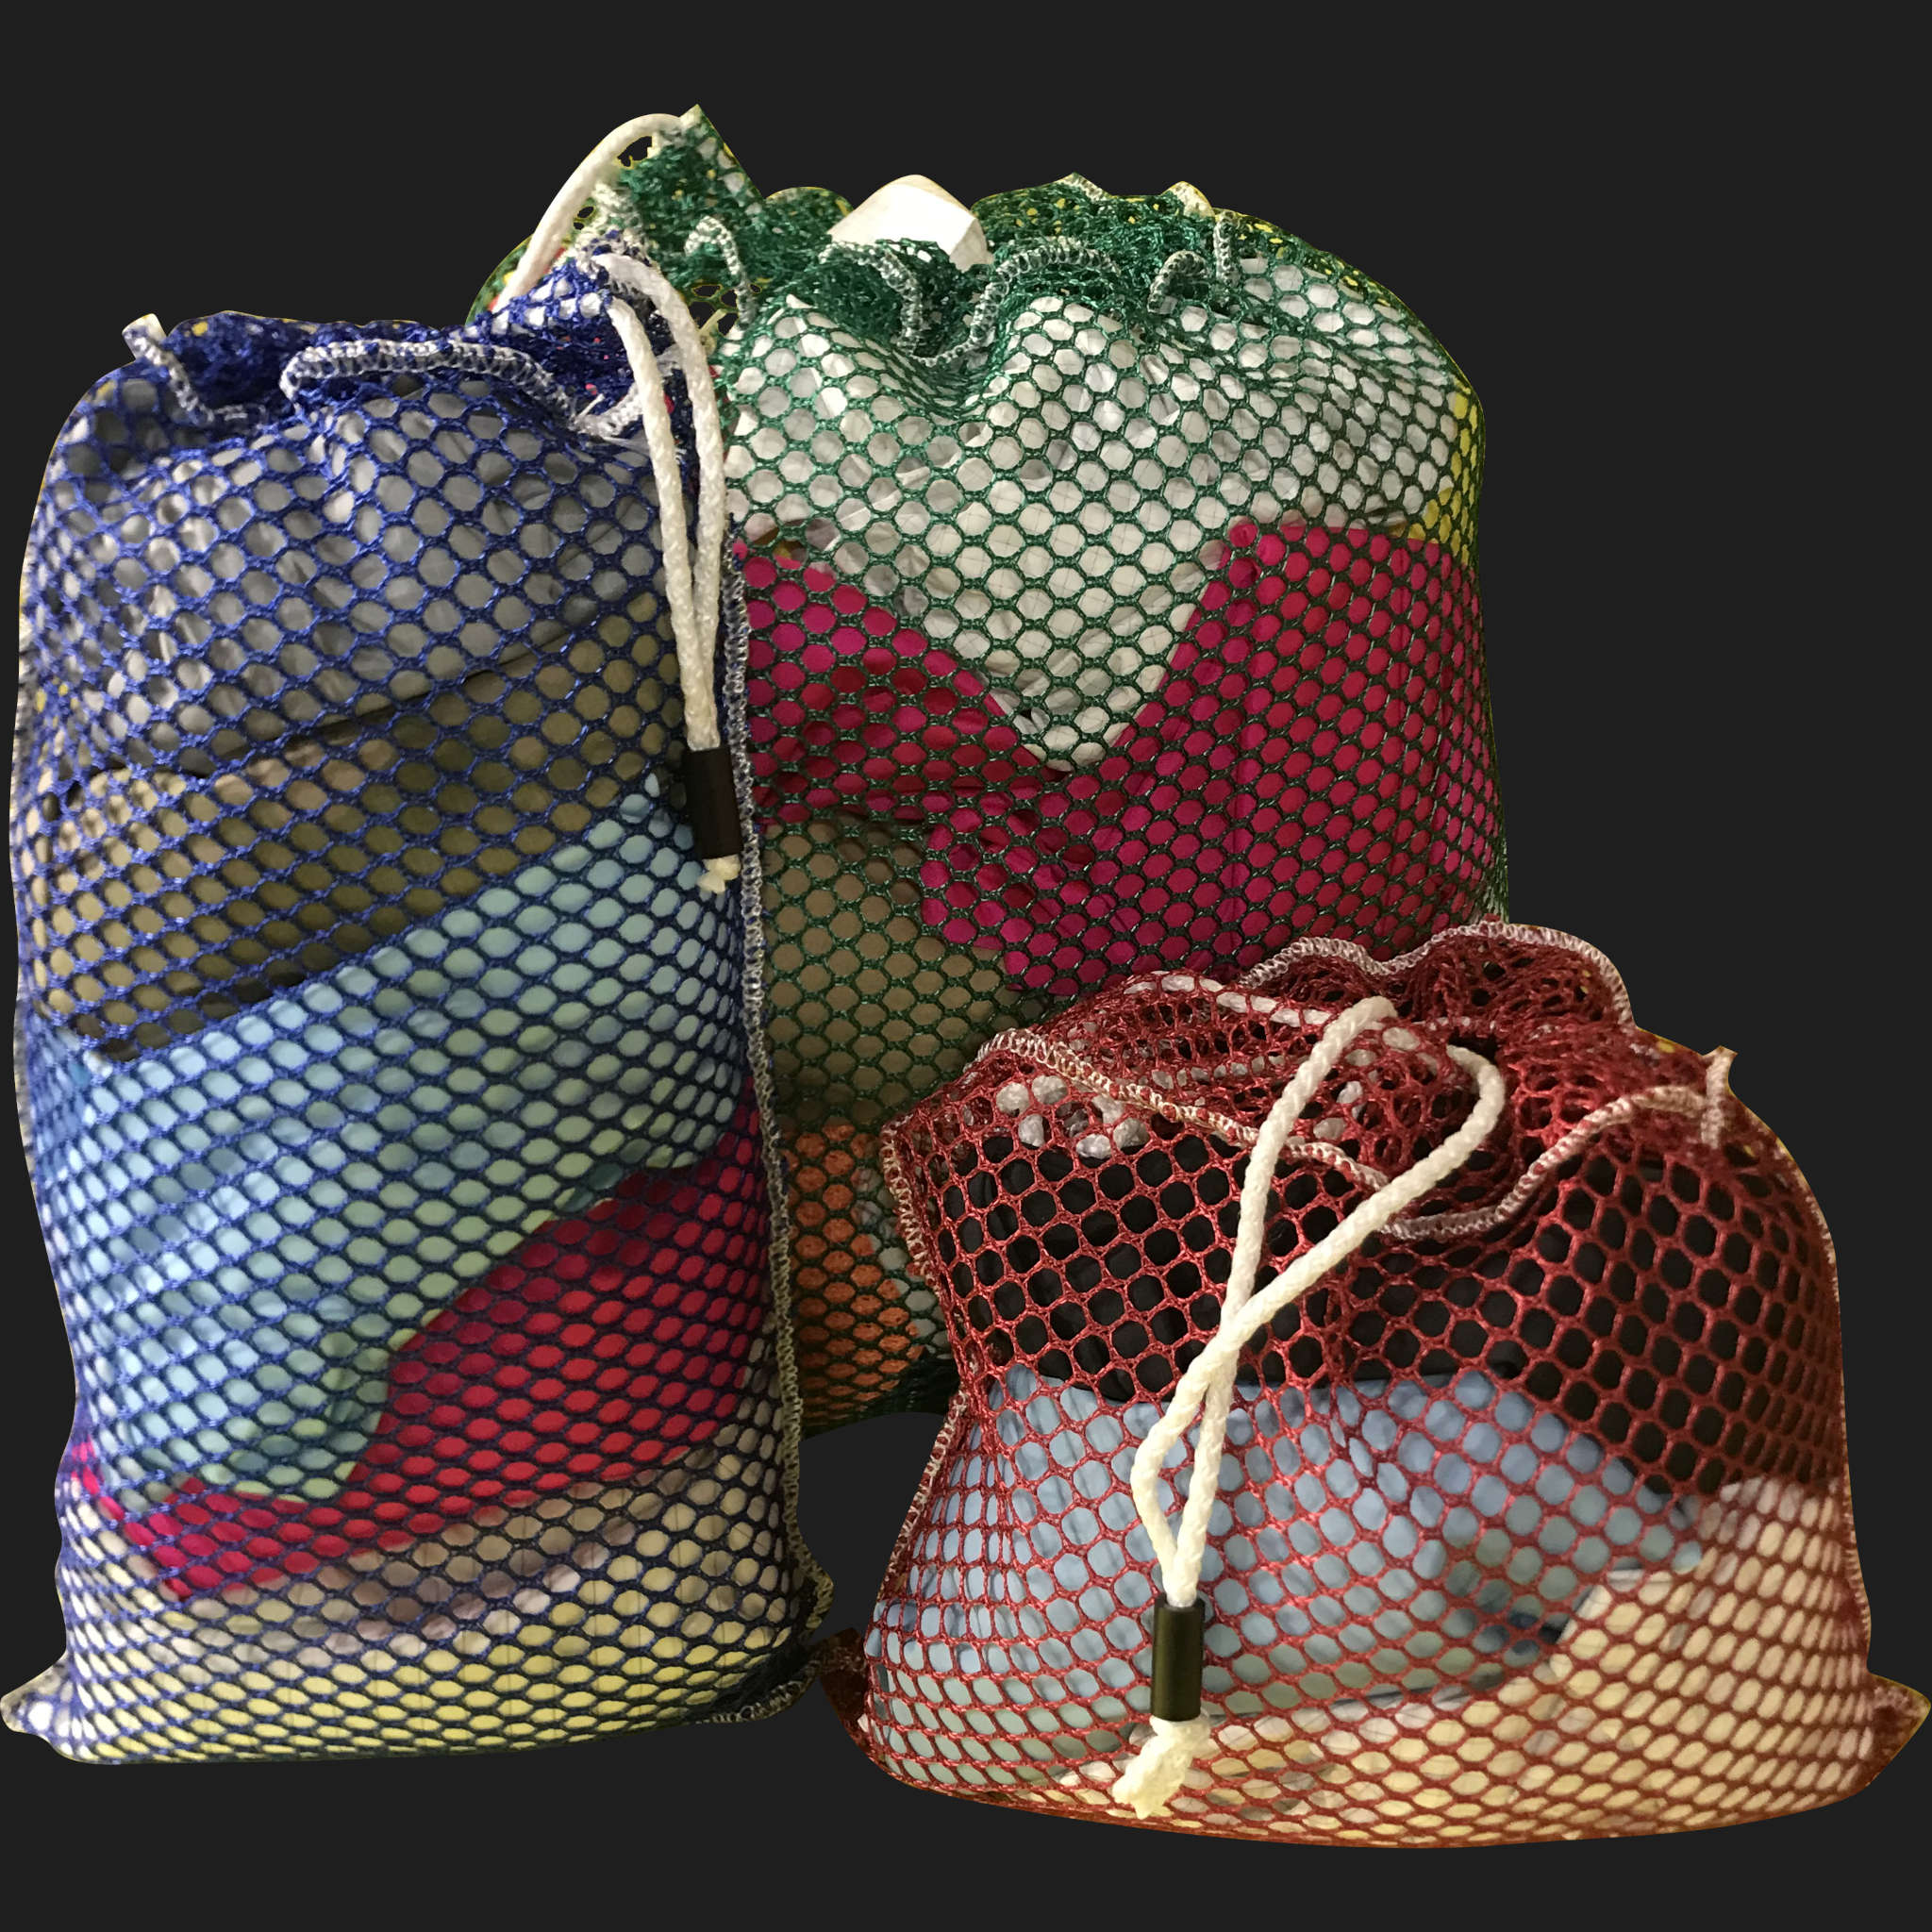 26" x 32" Customized Mesh-Net-Laundry Bags Heavy Duty with Cord and barrellock closure